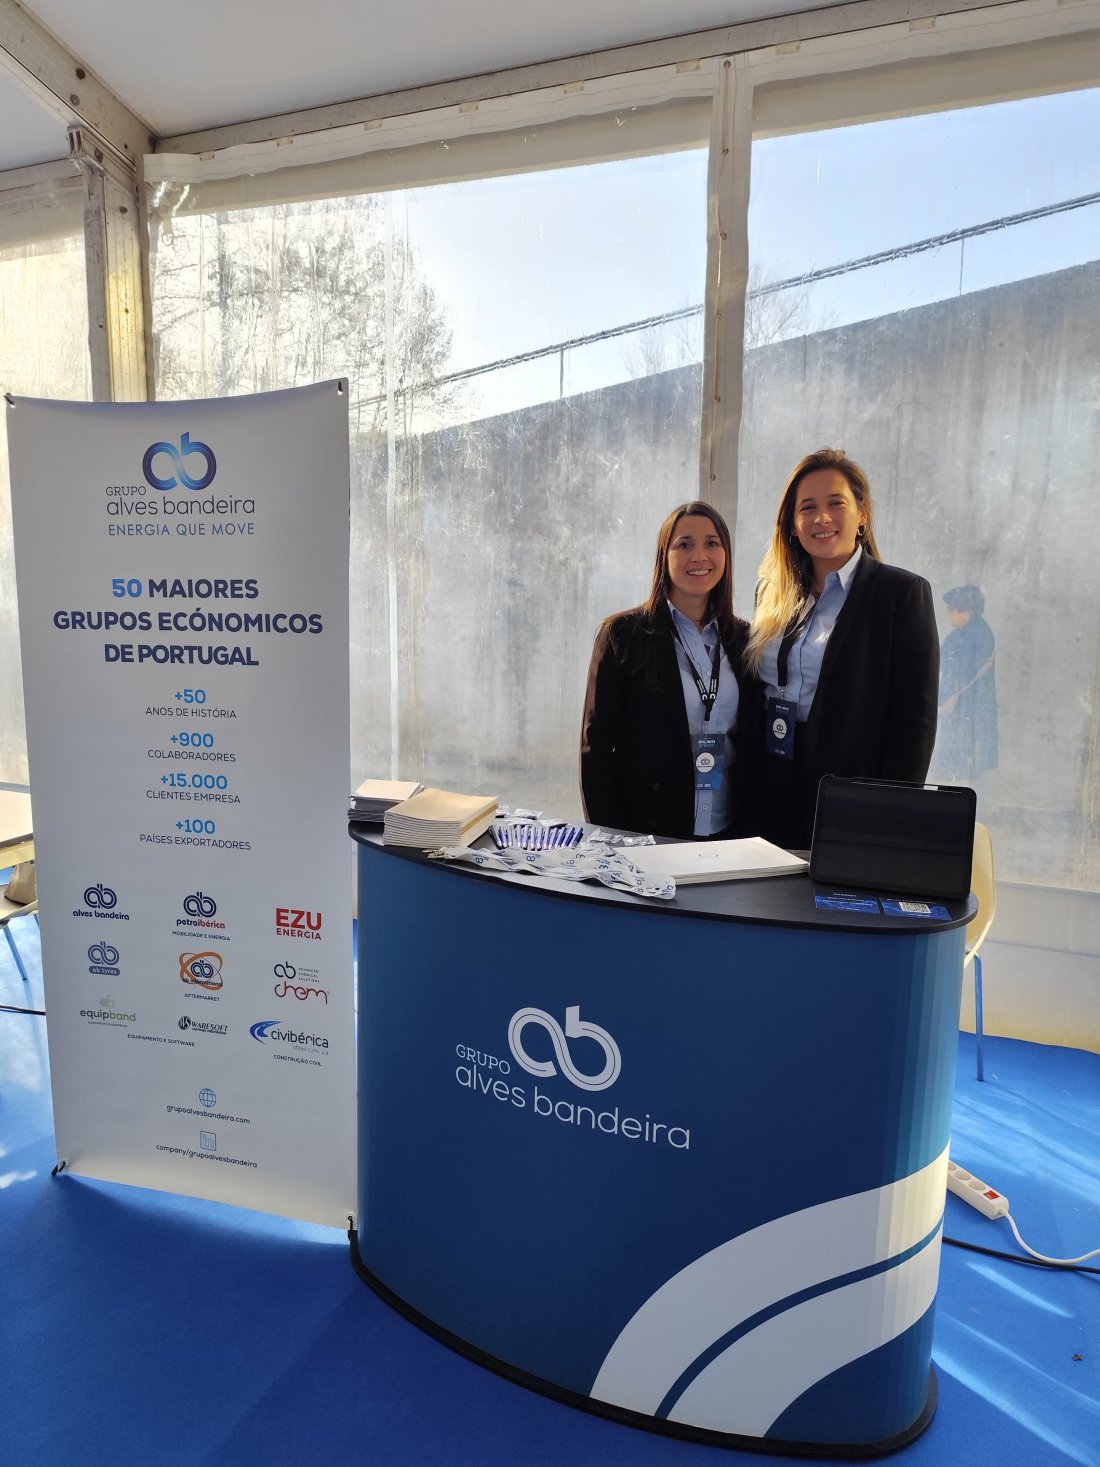 Alves Bandeira Group attends the 10th edition of Business Week